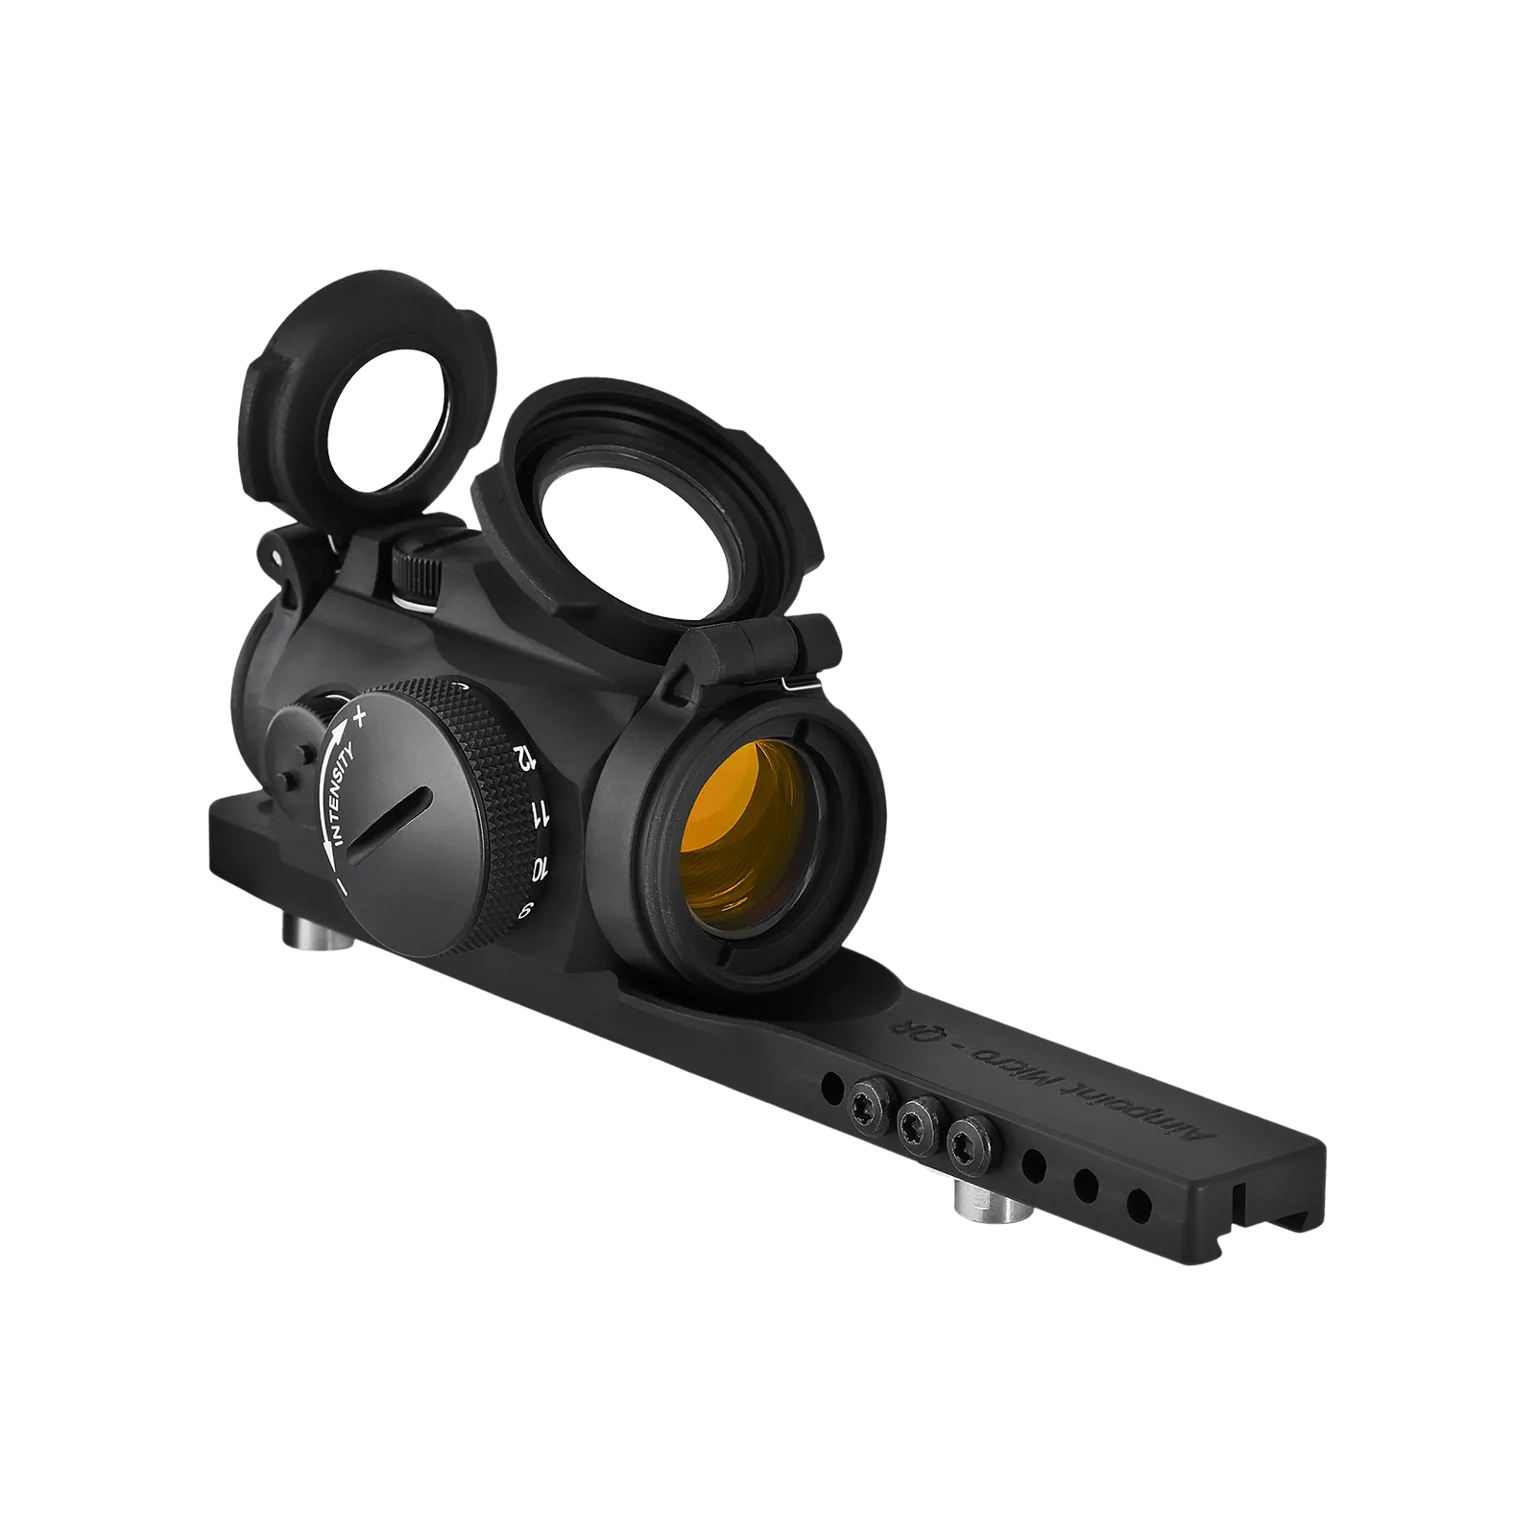 Micro H-2™ 2 MOA - Red dot reflex sight with mount for Leupold QR - 4